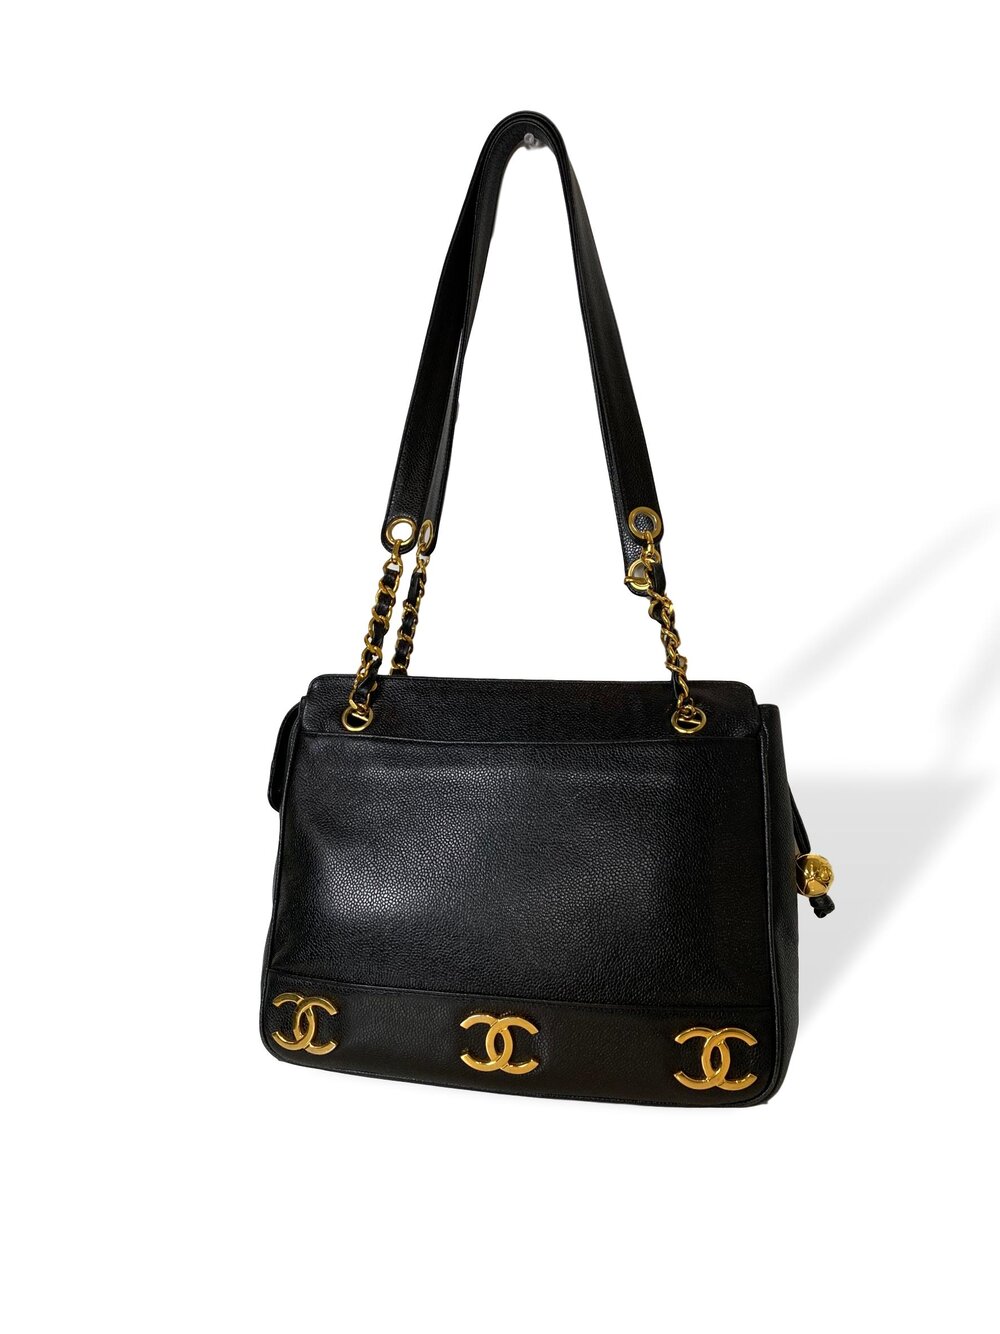 CHANEL VINTAGE BLACK CAVIAR LEATHER TOTE BAG for sale at auction on 22nd  July